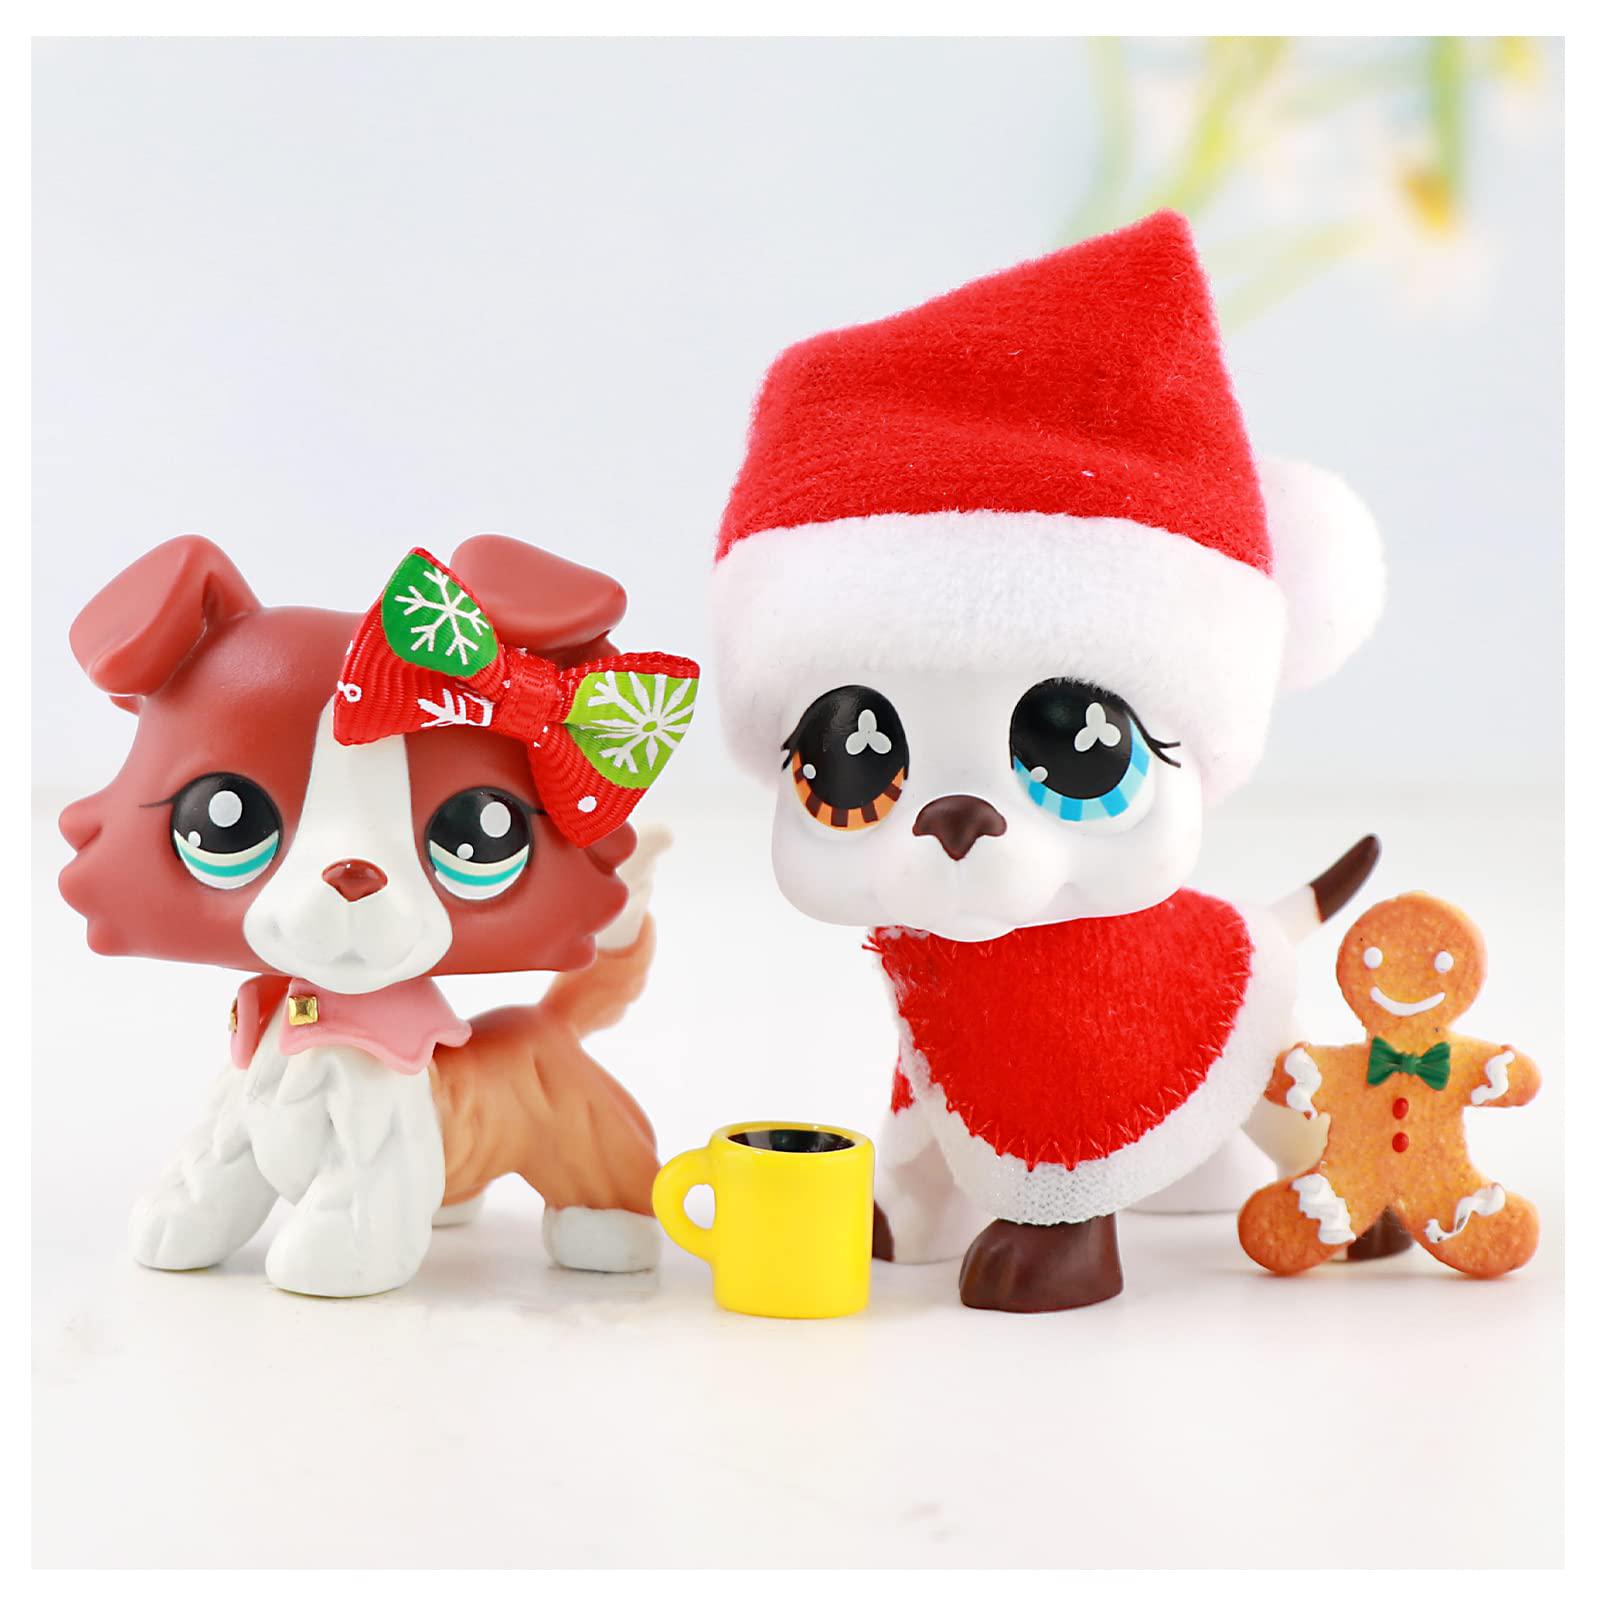 azarua us lps great dane 577 lps collie 1542 lps dogs puppy with lps  accessories kids xmas birthday gift